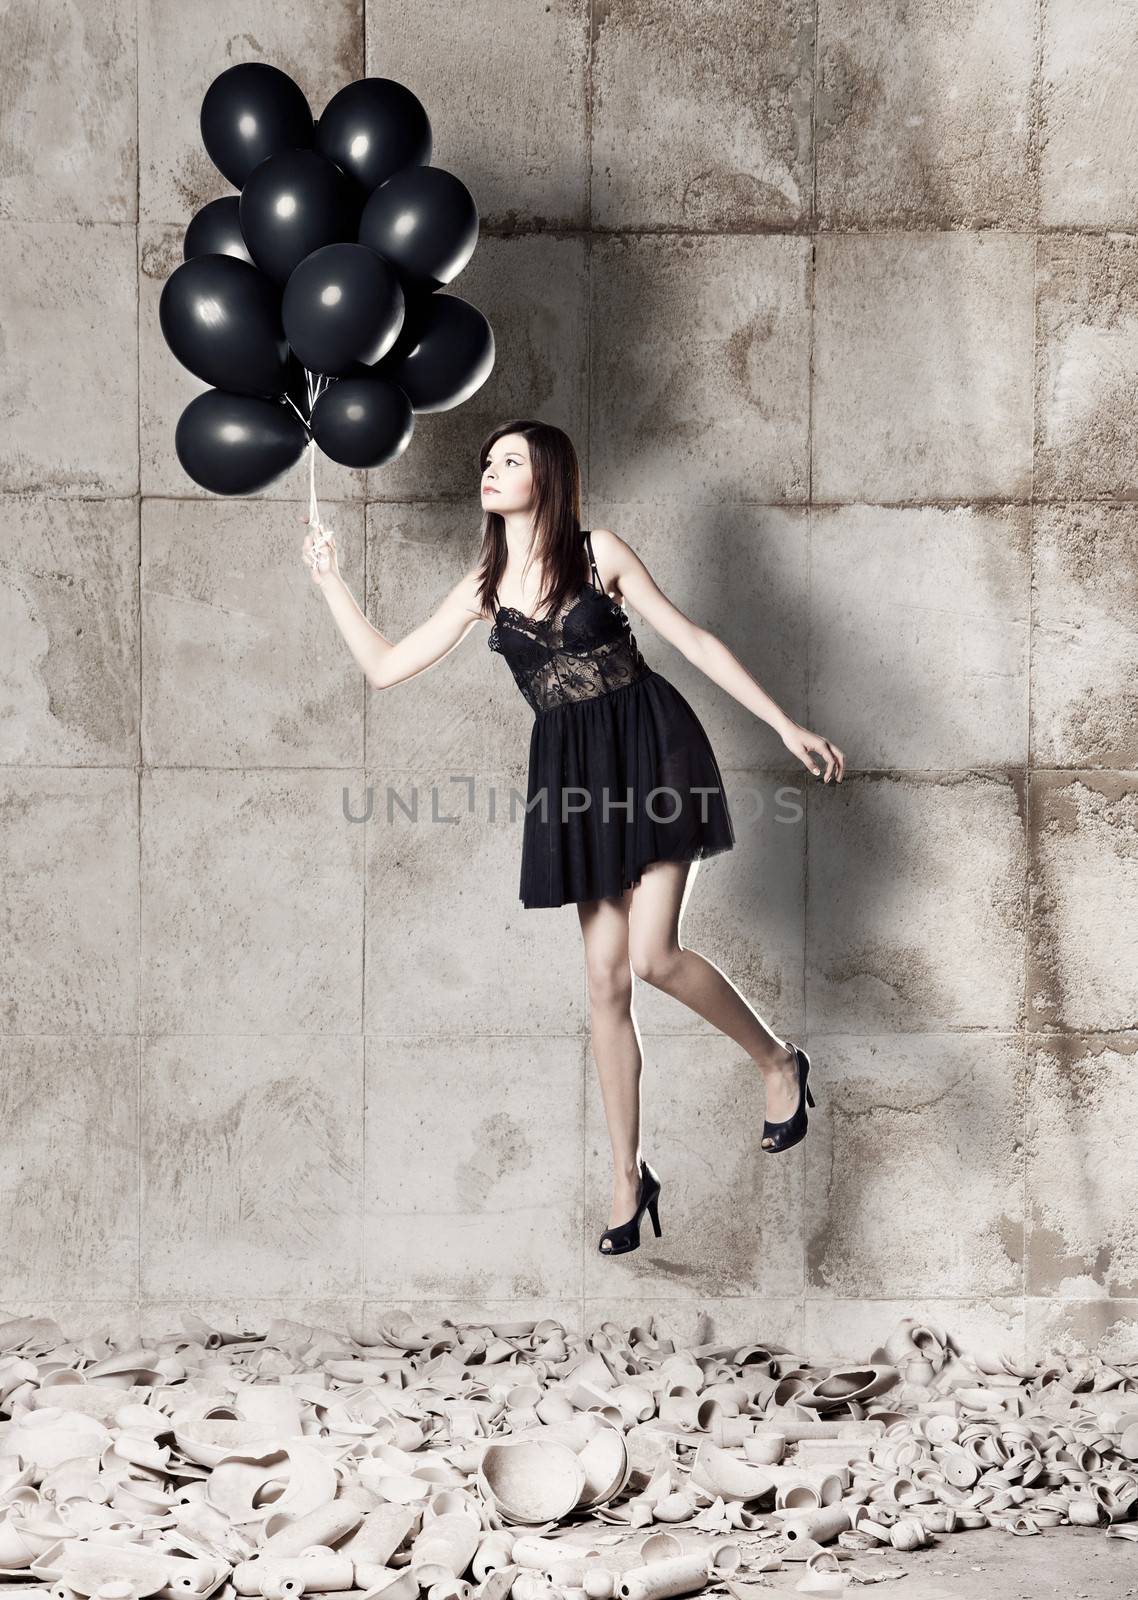 Fashion photoshoot with  a beautiful young woman holding balloons